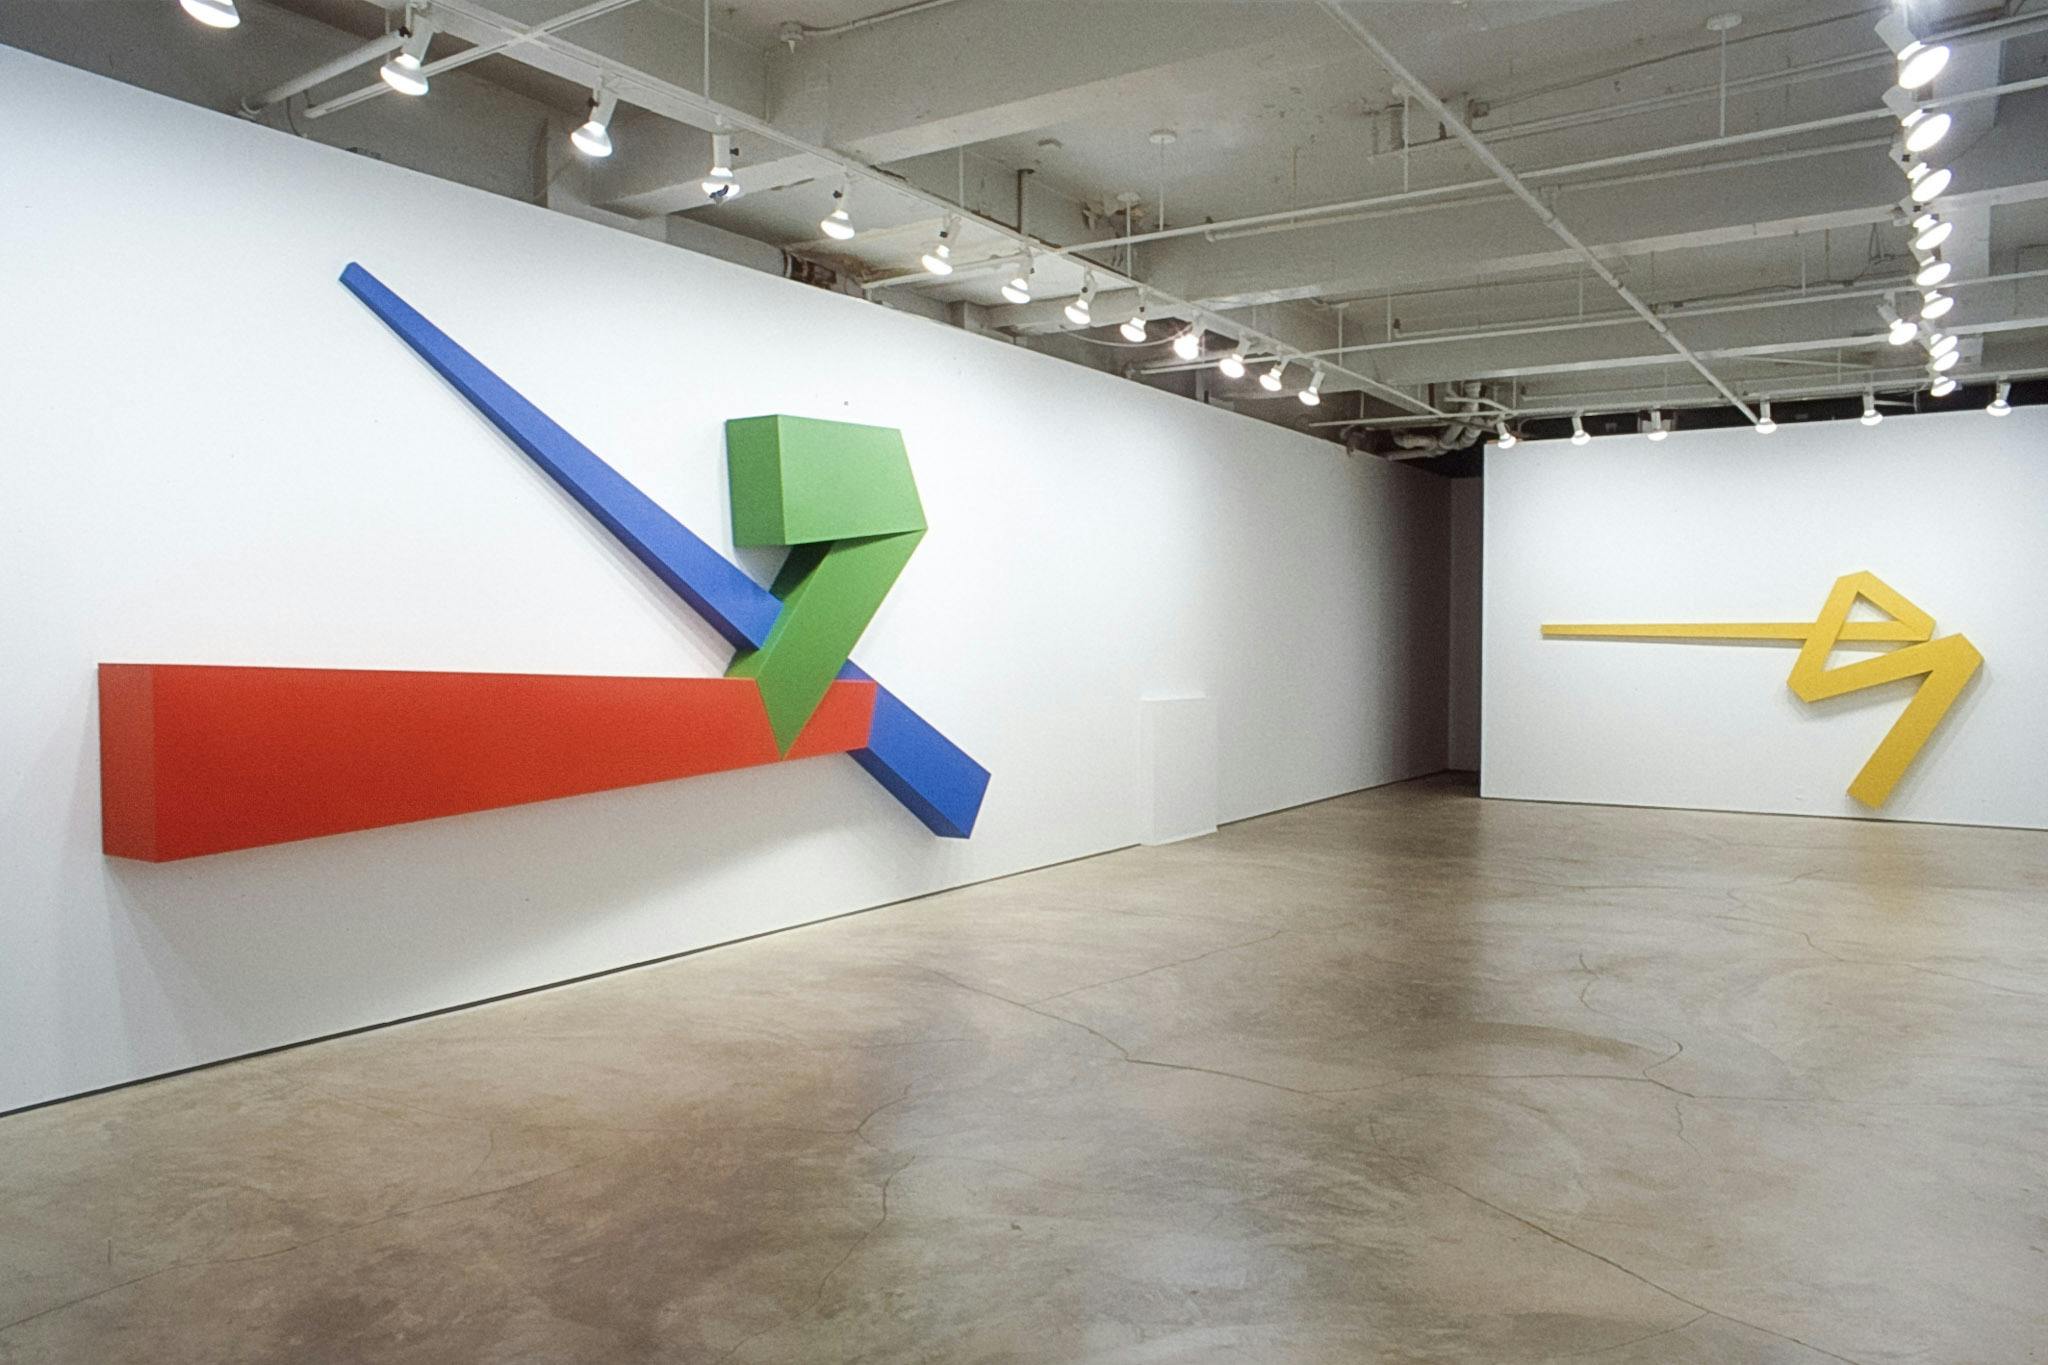 Two geometric sculptures are installed on the gallery walls. The left piece includes figures and straight lines in vivid red, green and blue. The piece on the right is yellow and resembles an arrow.   